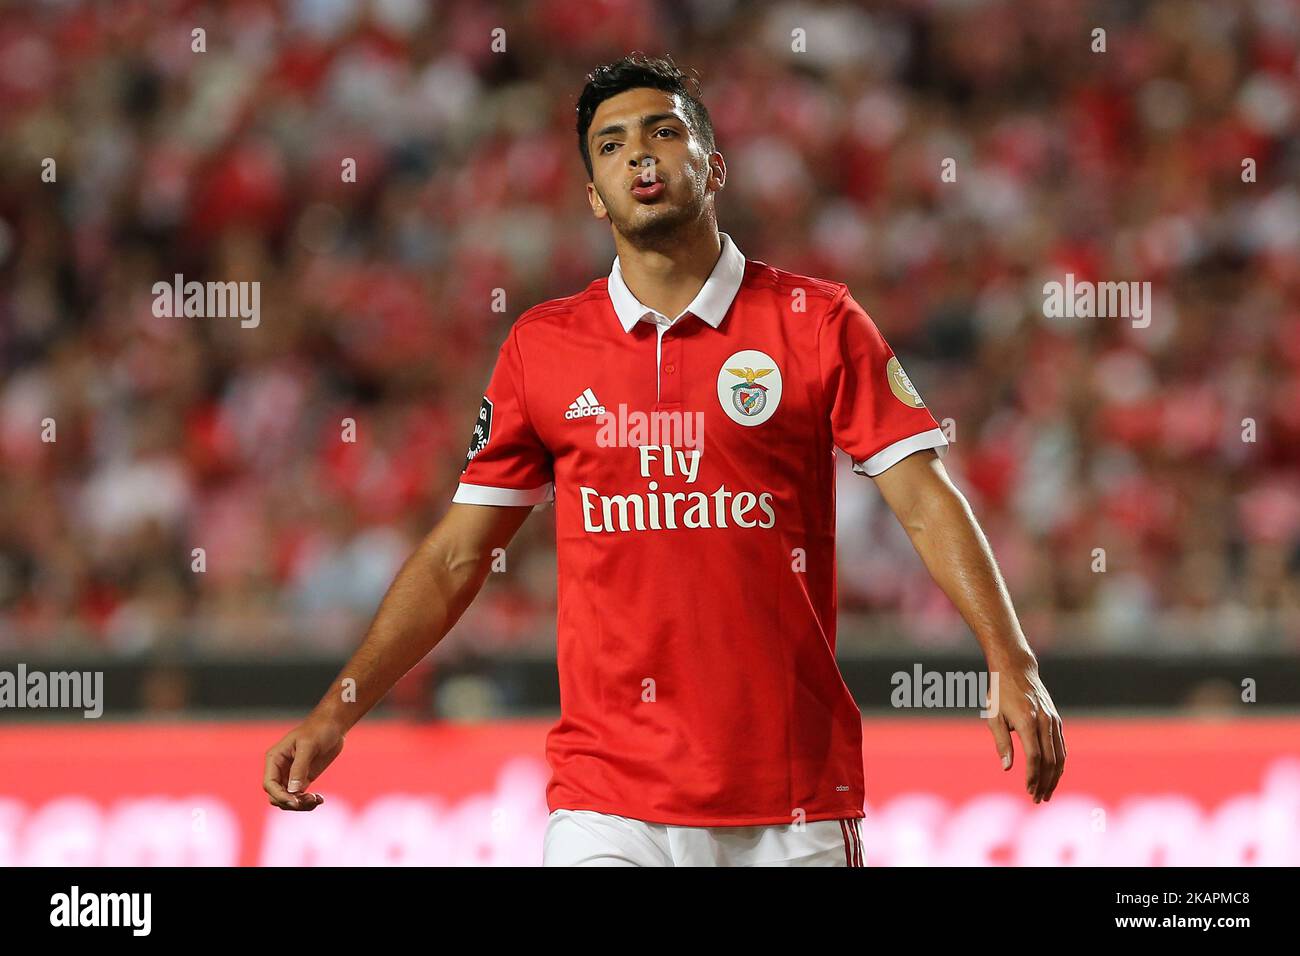 Benficas forward Raul Jimenez from Mexico during the Premier League 2017/18 match between SL Benfica v CF Belenenses, at Luz Stadium in Lisbon on August 19, 2017. (Photo by Bruno Barros / DPI / NurPhoto) Stock Photo